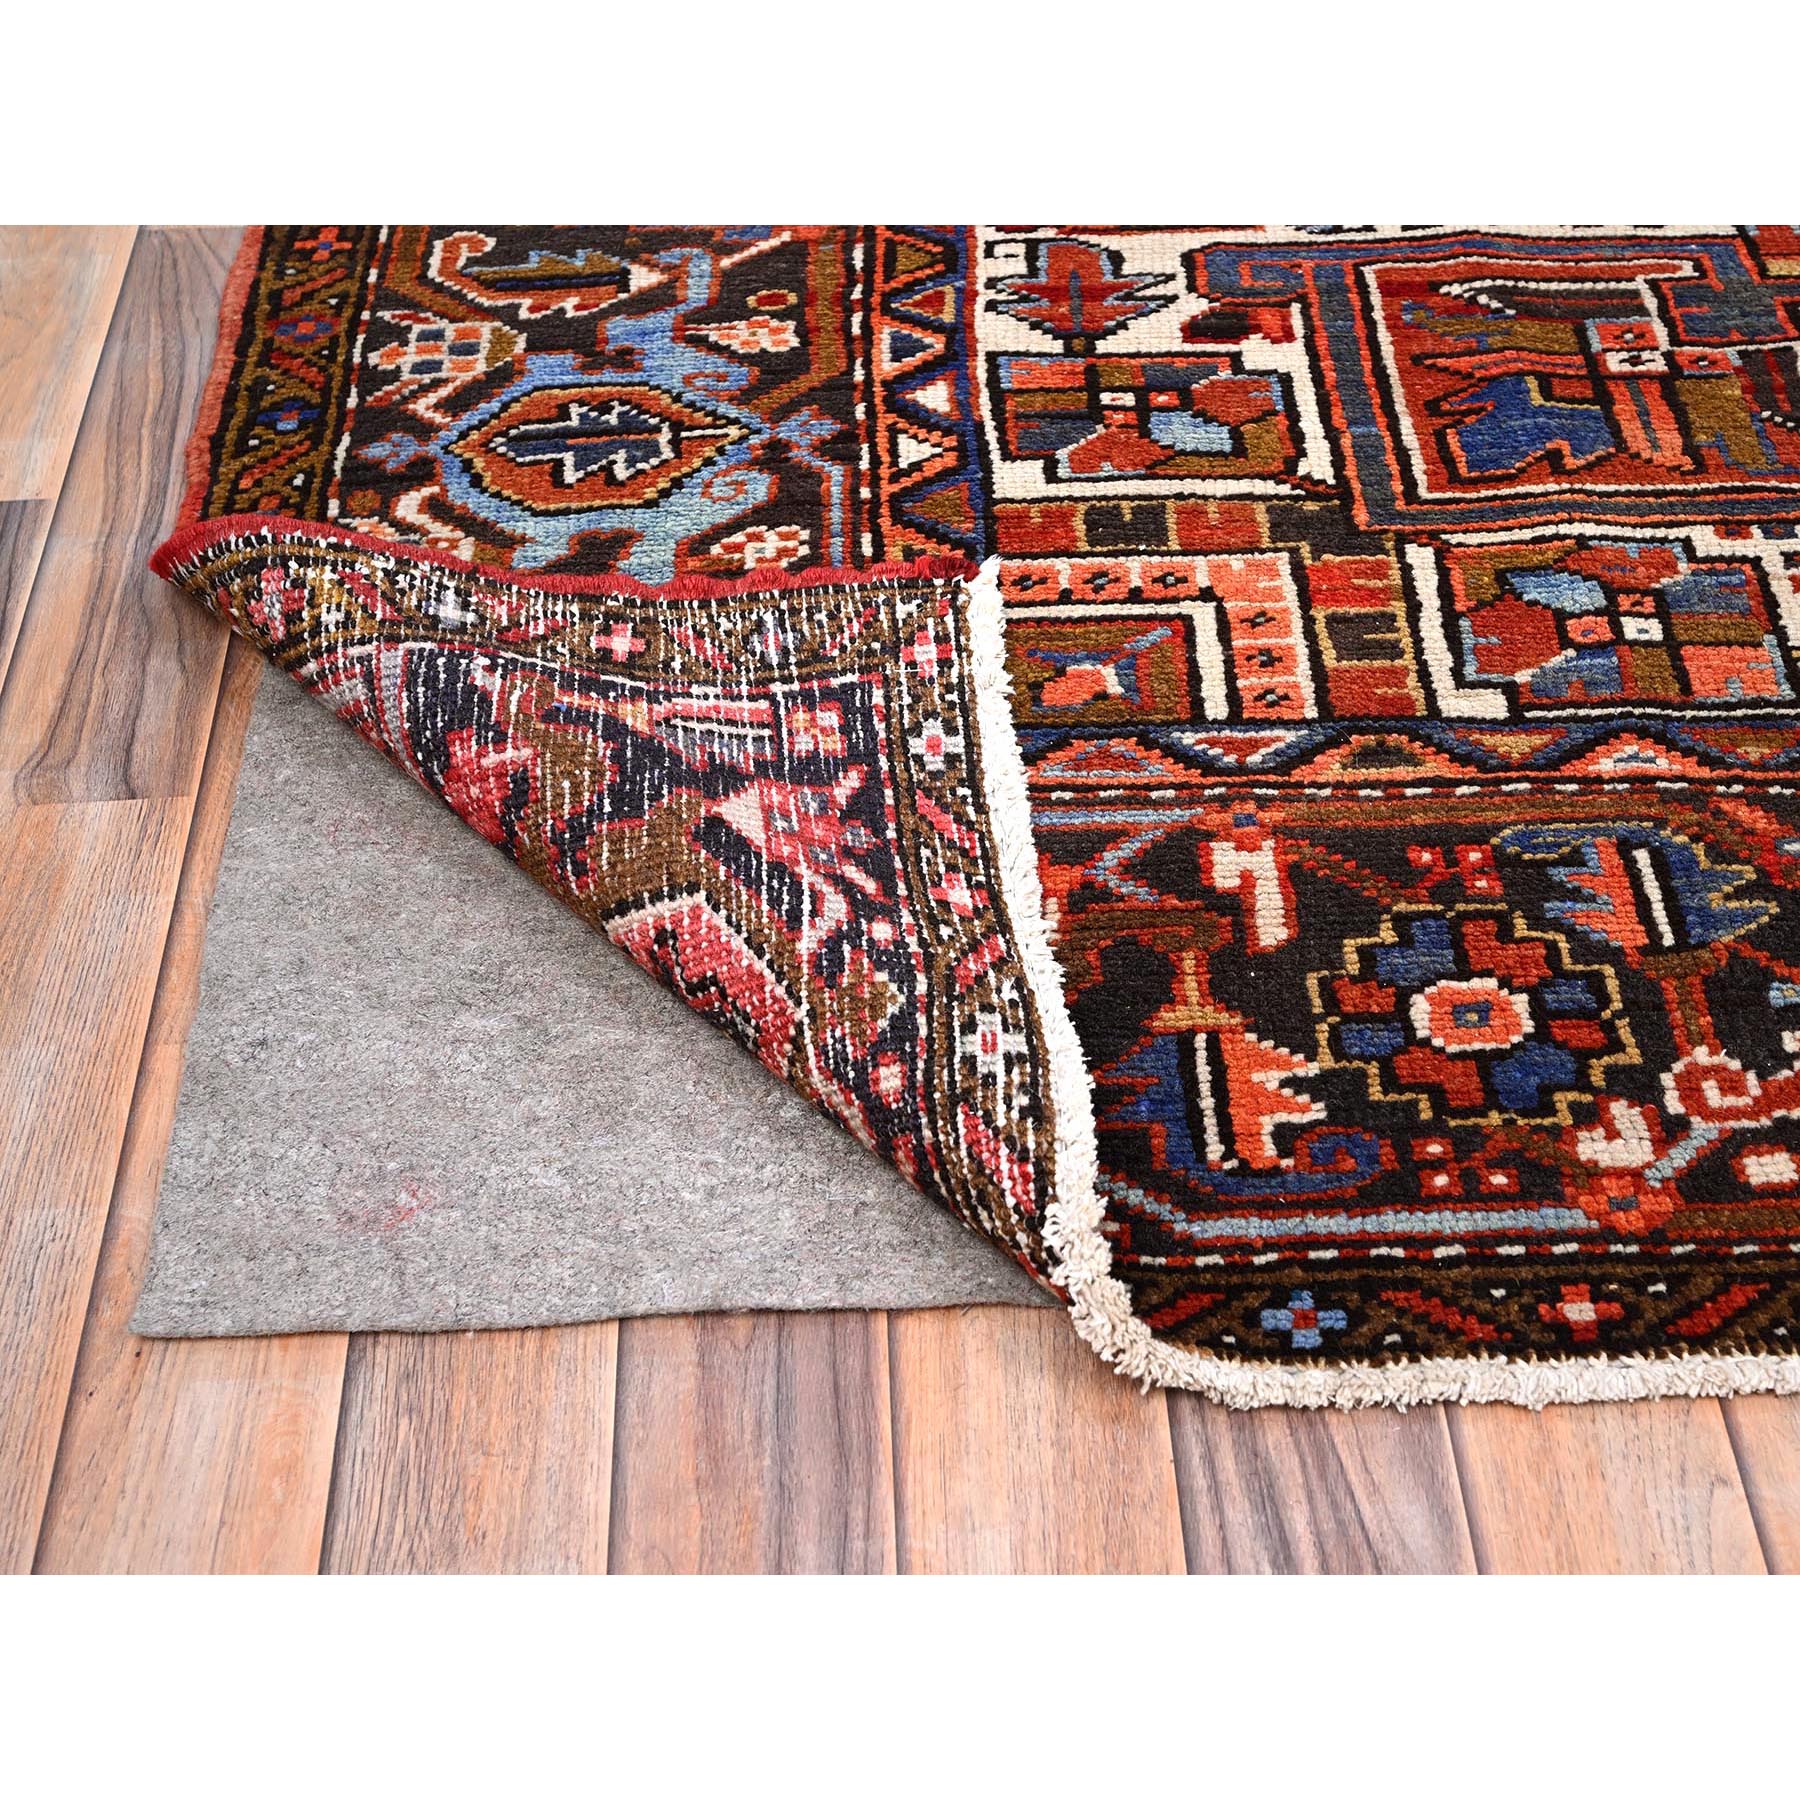 9'1"x11'4" Tomato Red, Hand Woven, Semi Antique Persian Heriz with Village Motif, Good Condition, Rustic Look, Worn Wool, Oriental Rug 